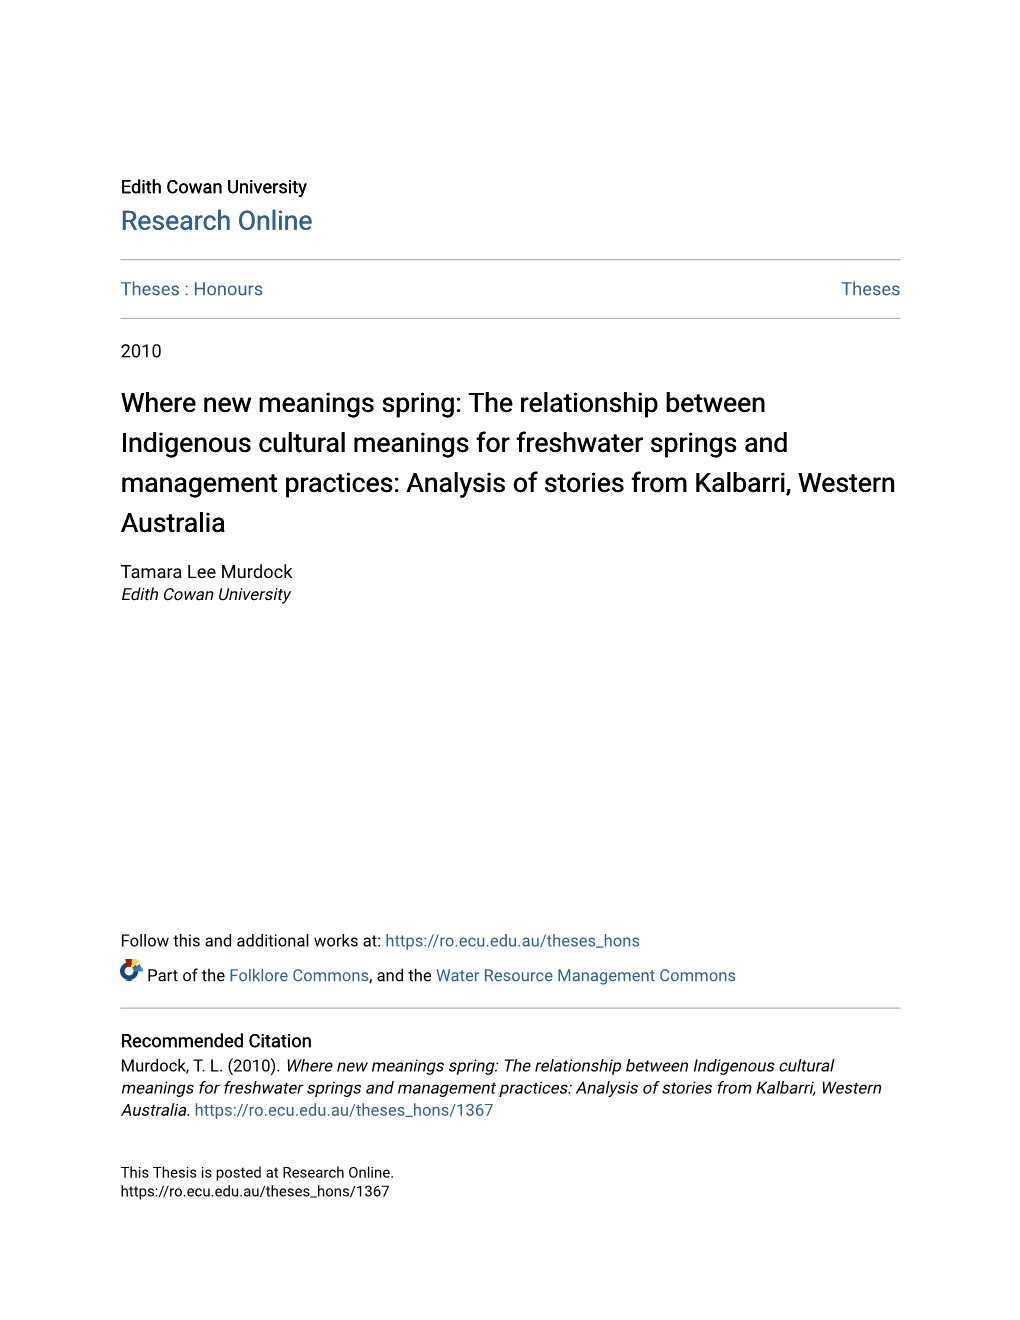 The Relationship Between Indigenous Cultural Meanings for Freshwater Springs and Management Practices: Analysis of Stories from Kalbarri, Western Australia